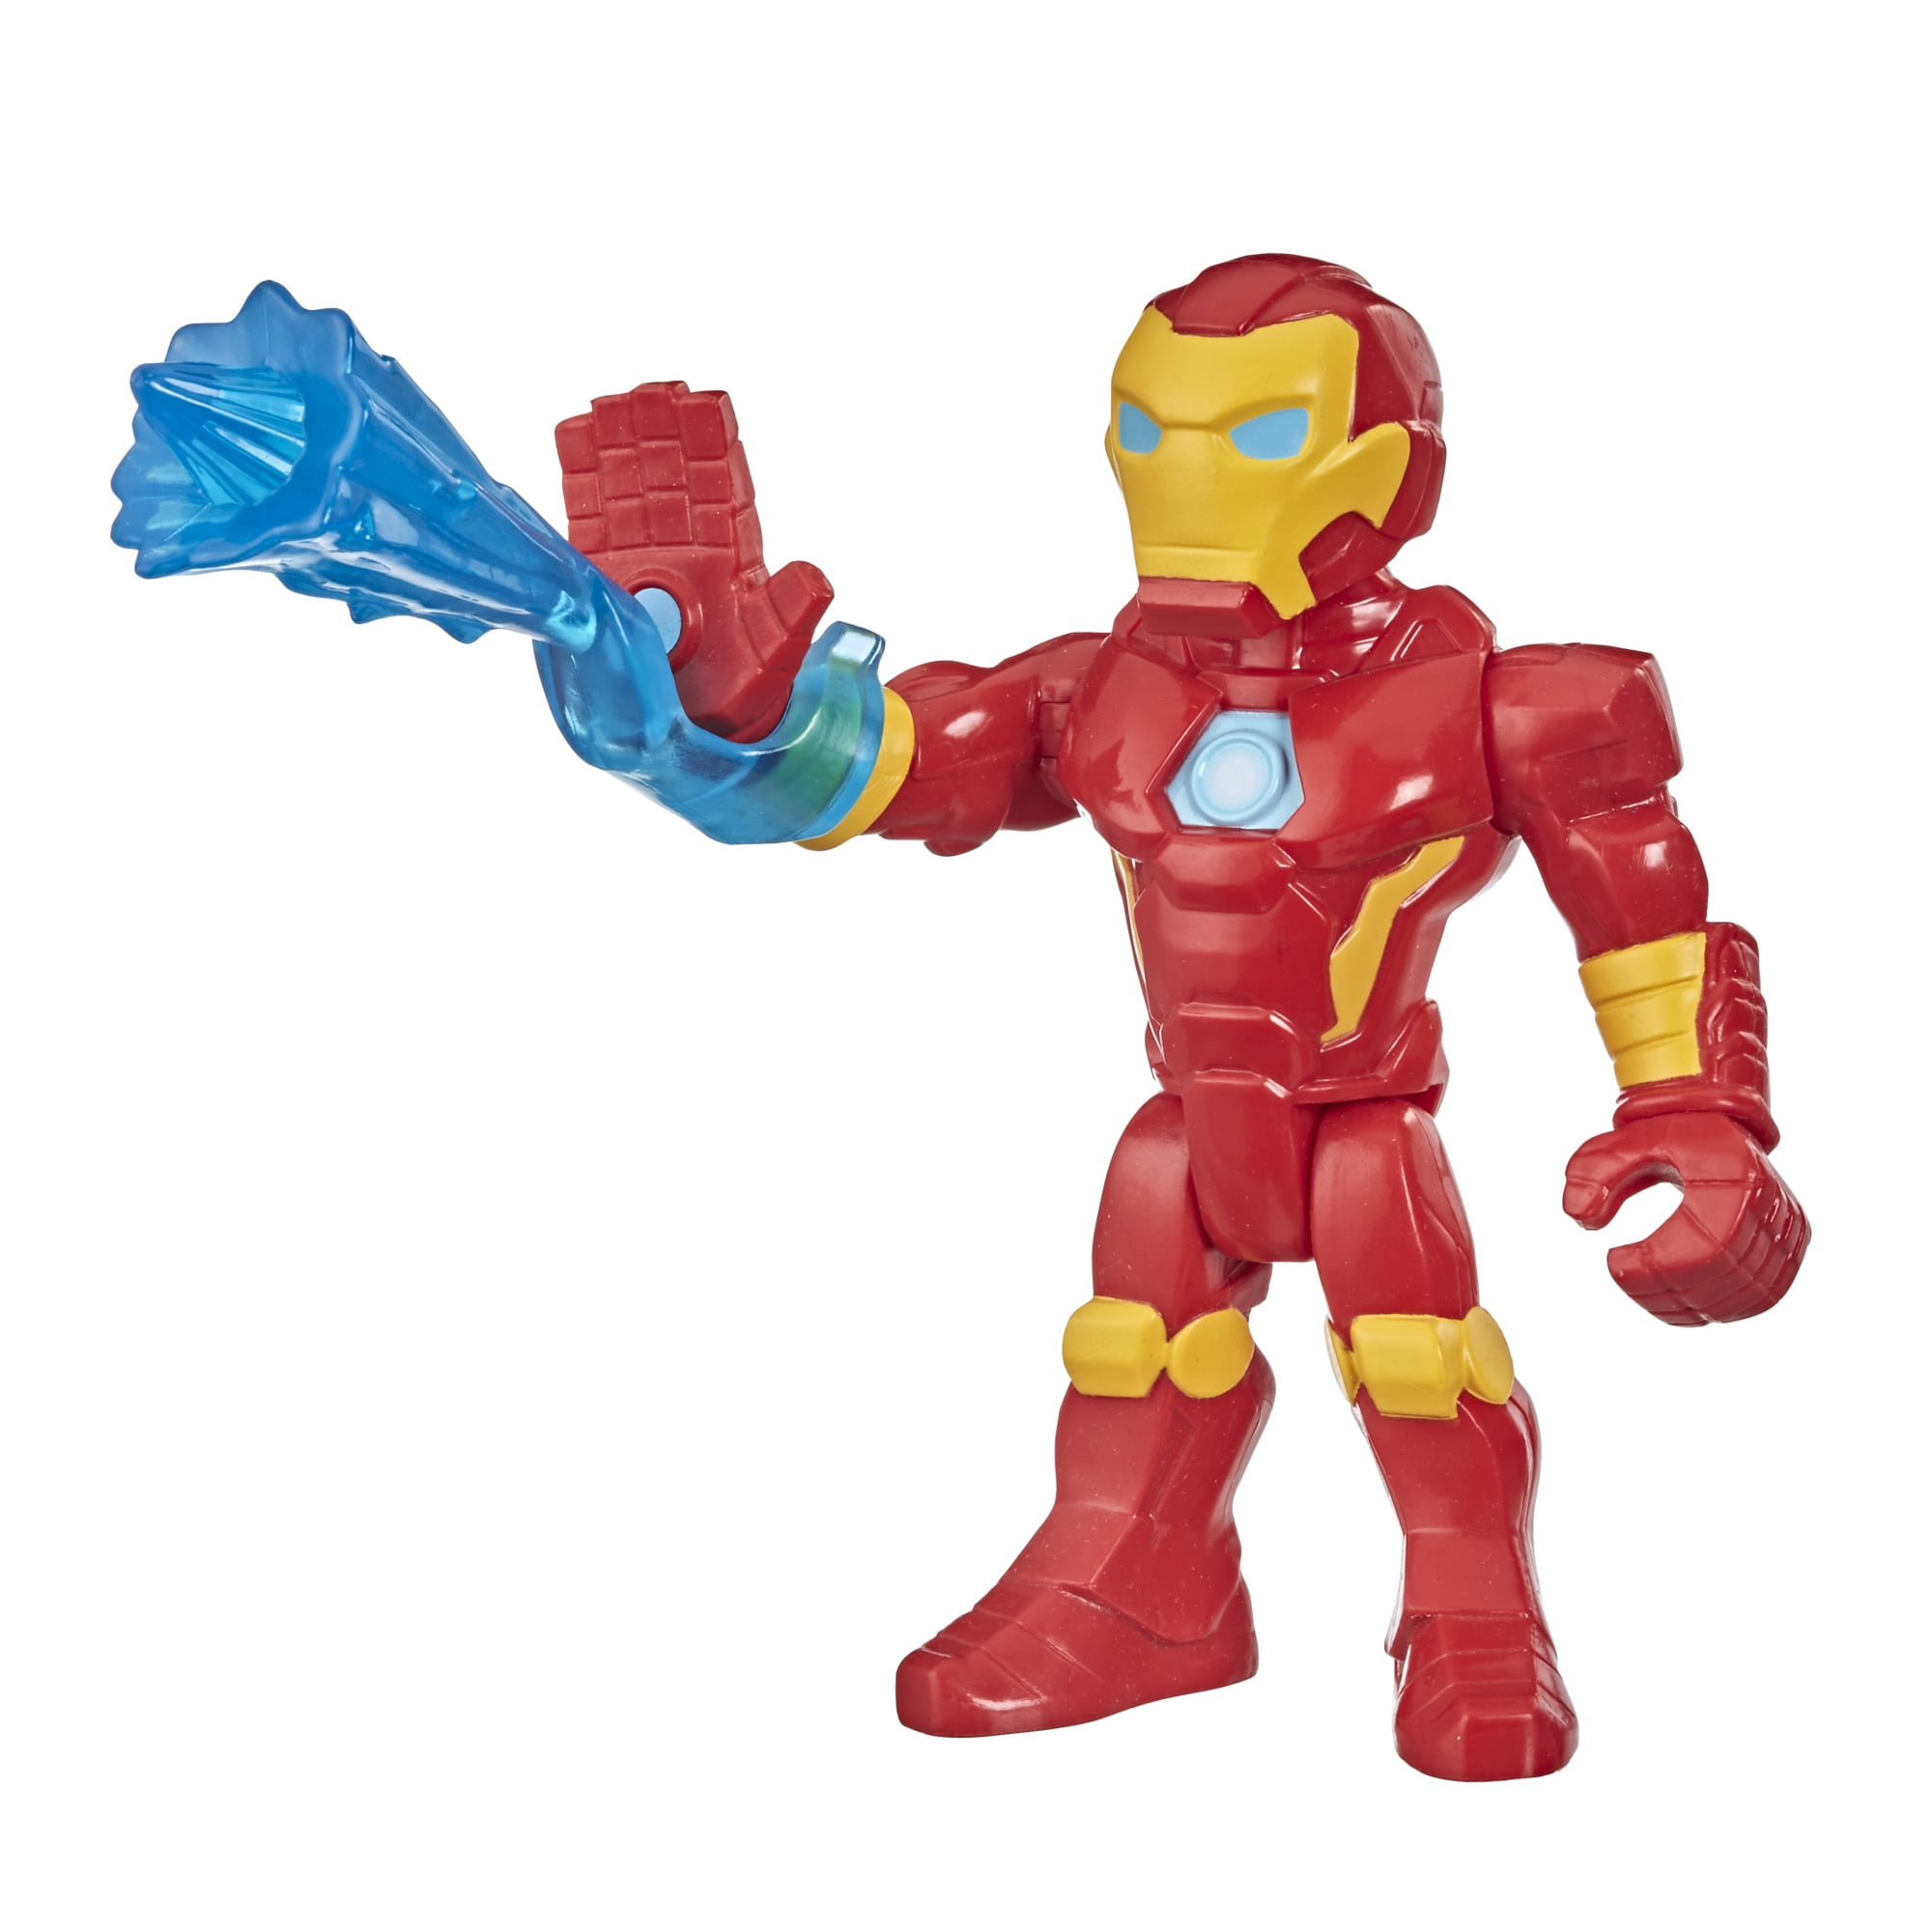 UP to 30 Different Playskool Marvel Super Hero Adventures Figures Your Choice 